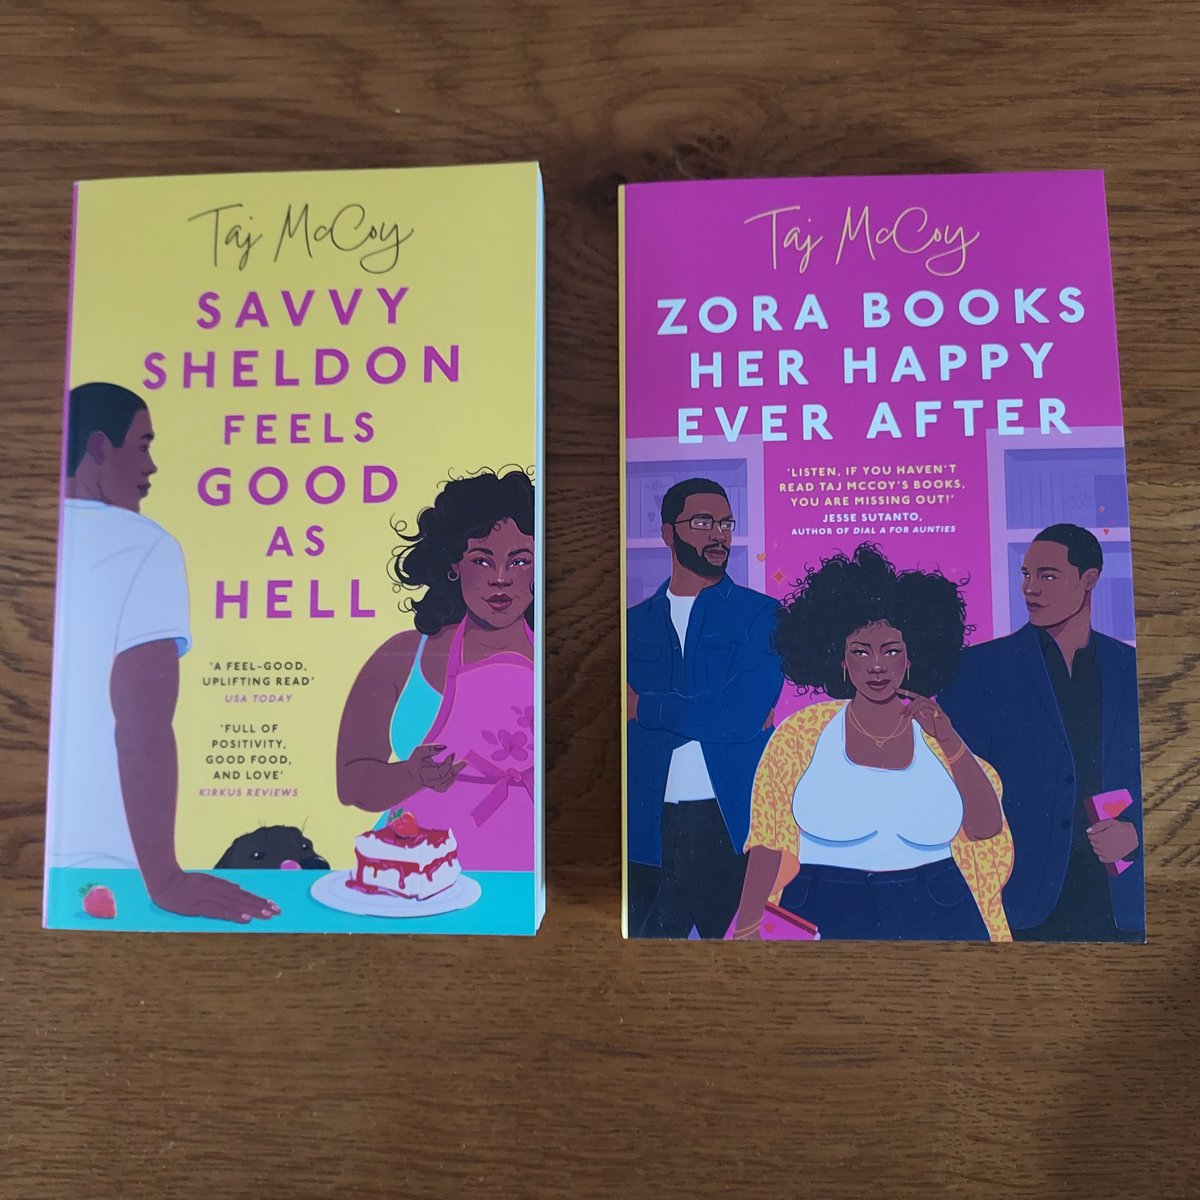 Thank you so much @millieseaward and @dialoguebooks for these two fab books by @tajmccoywrites, both out on 27 April.
#zorabooksherhappyeverafter #savvysheldonfeelsgoodashell